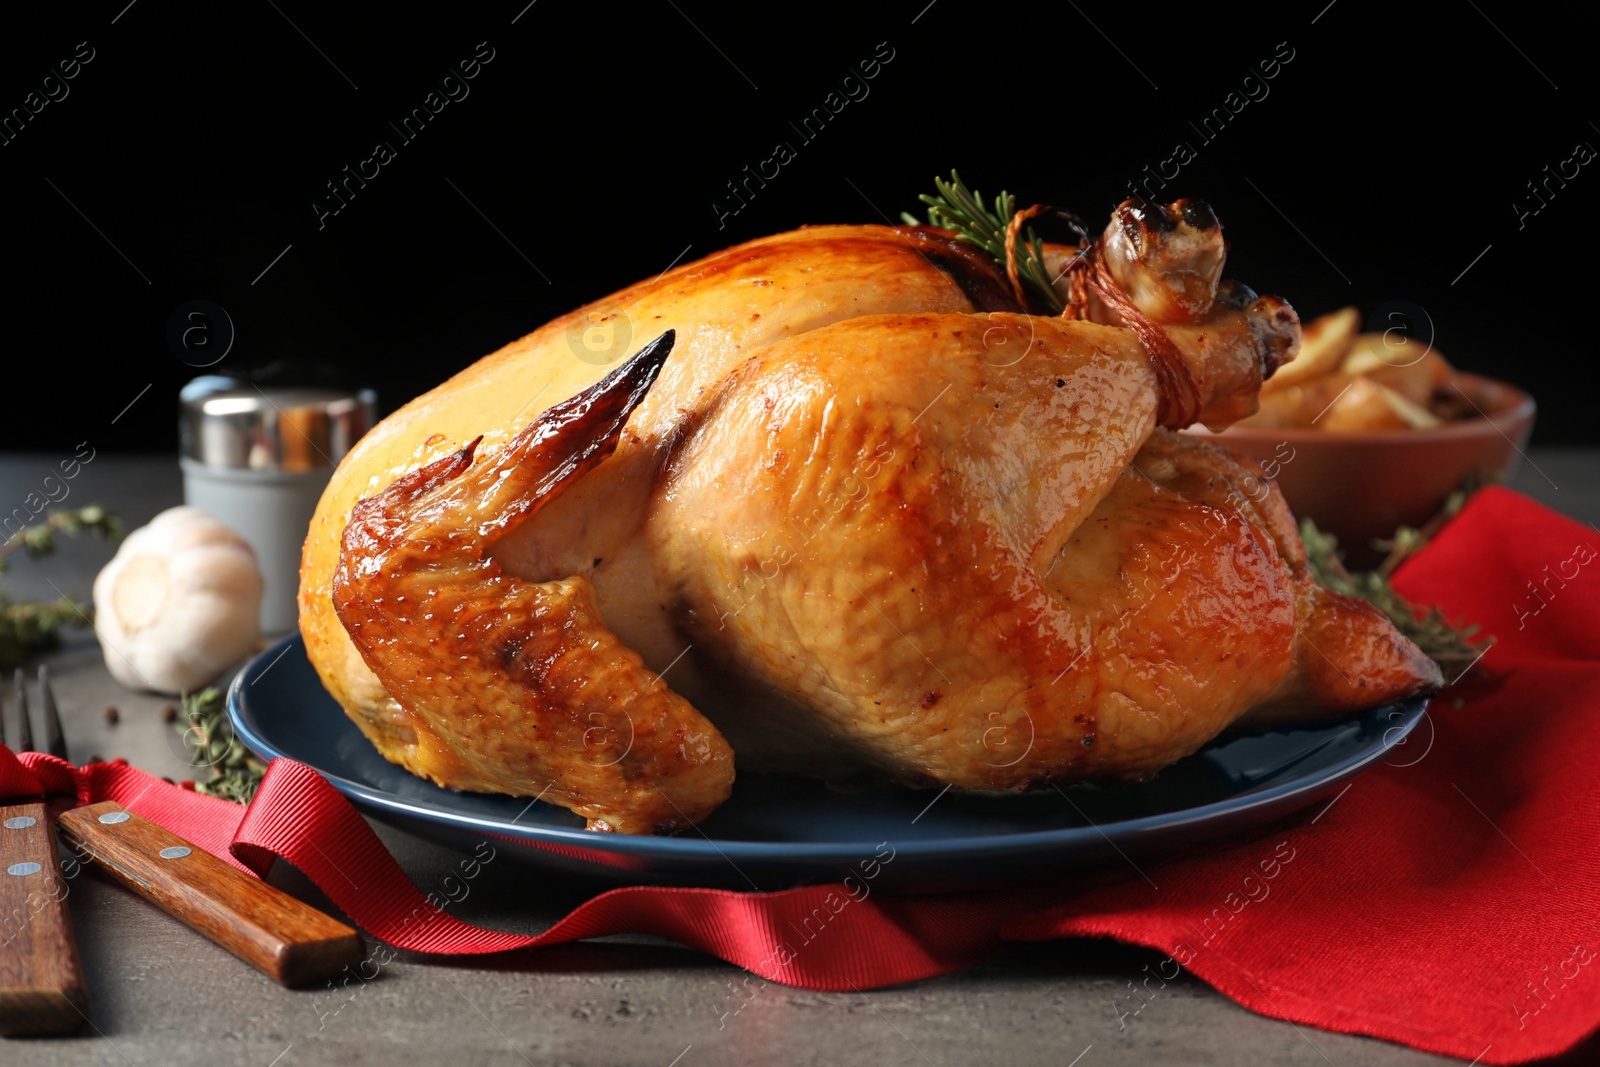 Photo of Platter of cooked turkey with rosemary served on table